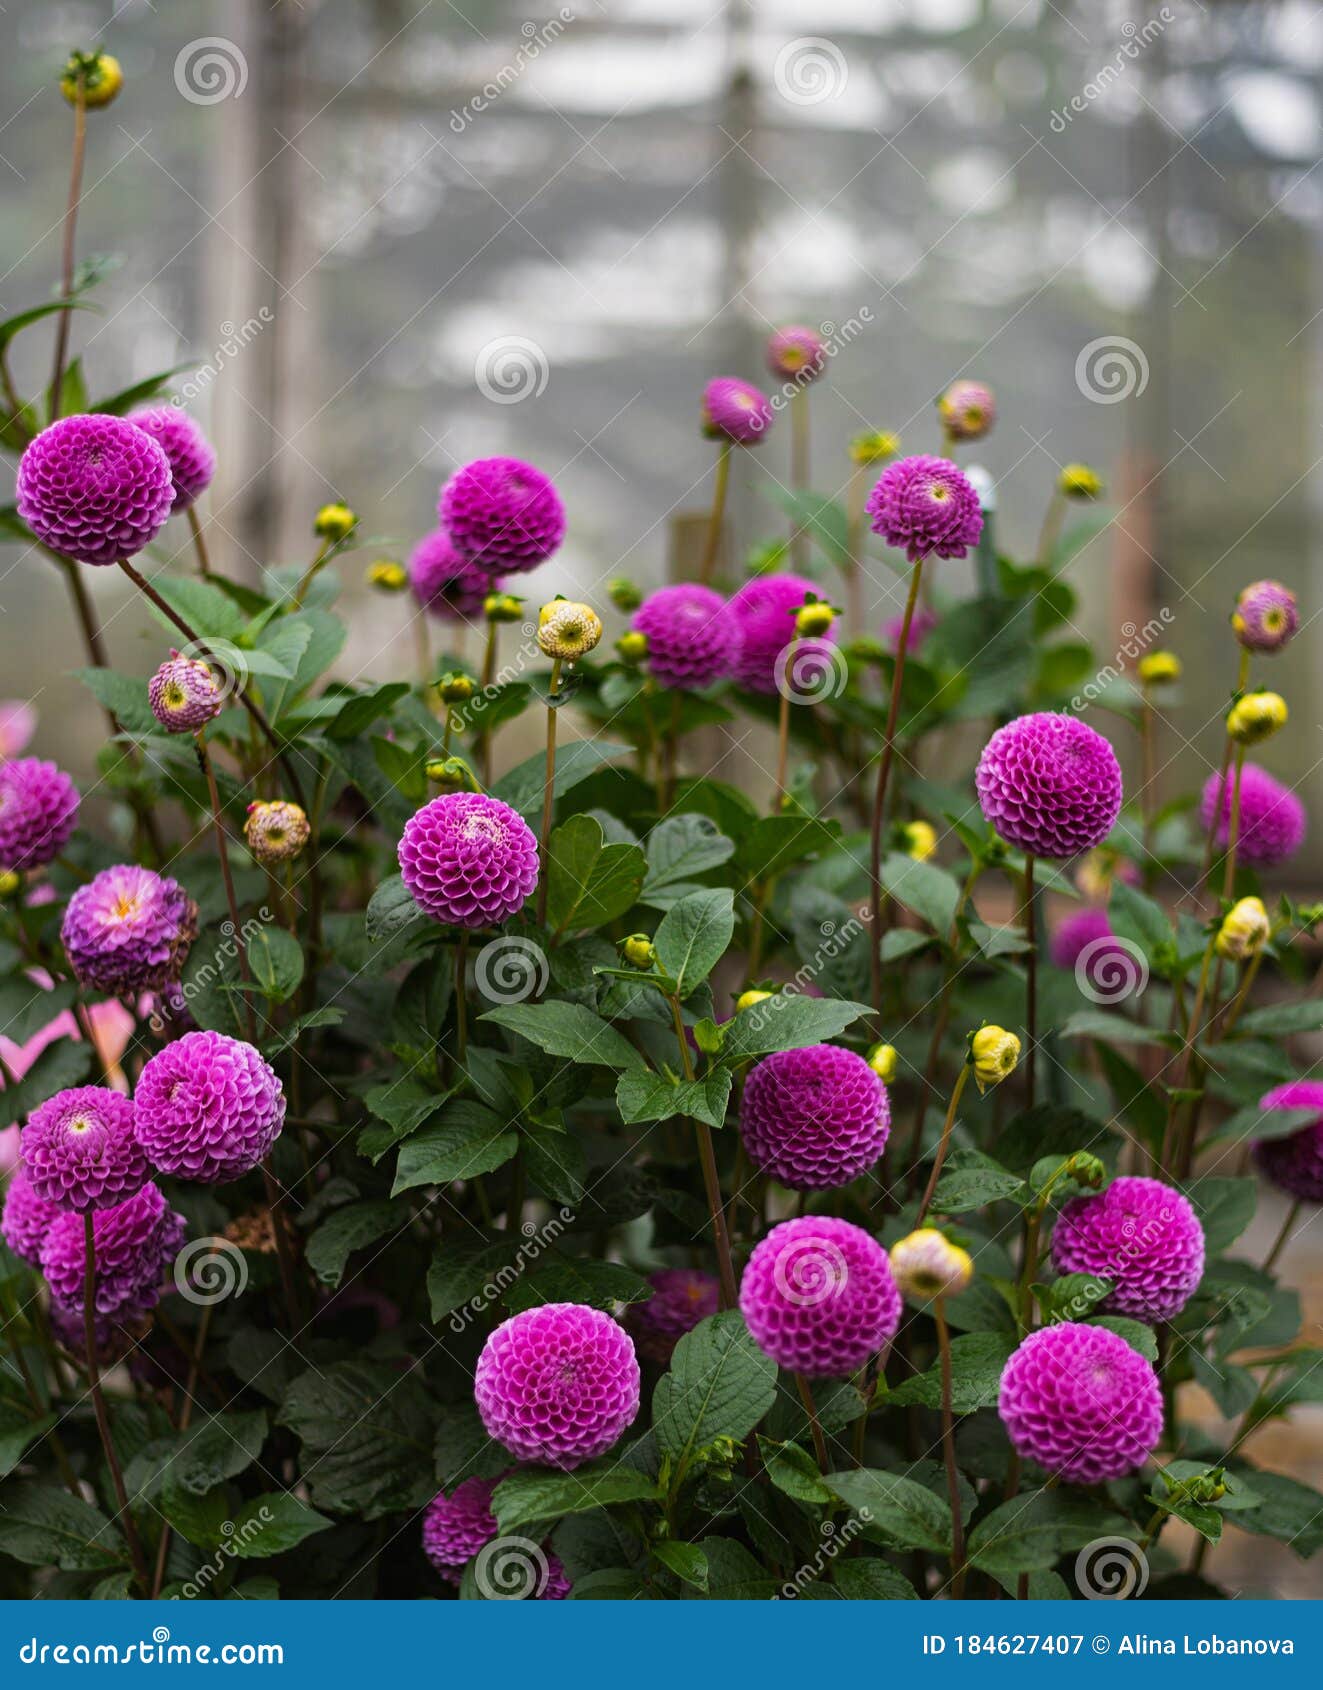 Purple Spherical Pion-shaped Pompom Dahlias, Fresh Blooming Flower Buds  Round Flowers with Rounded Ends Stock Image - Image of flora, boucuet:  184627407